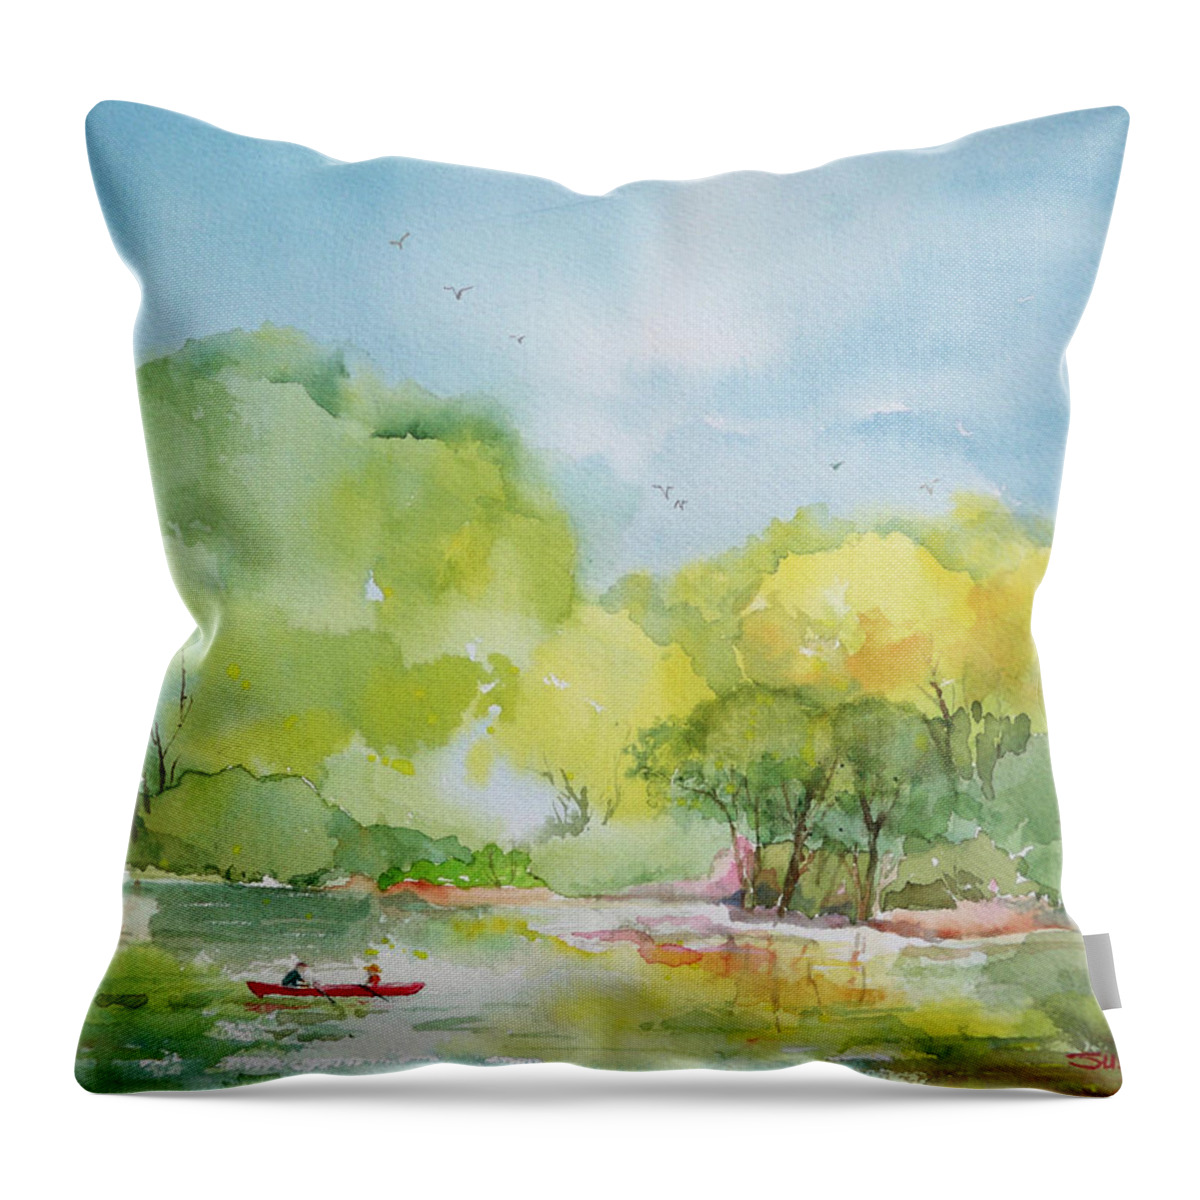 Lake Throw Pillow featuring the painting The Red Boat by Sue Kemp